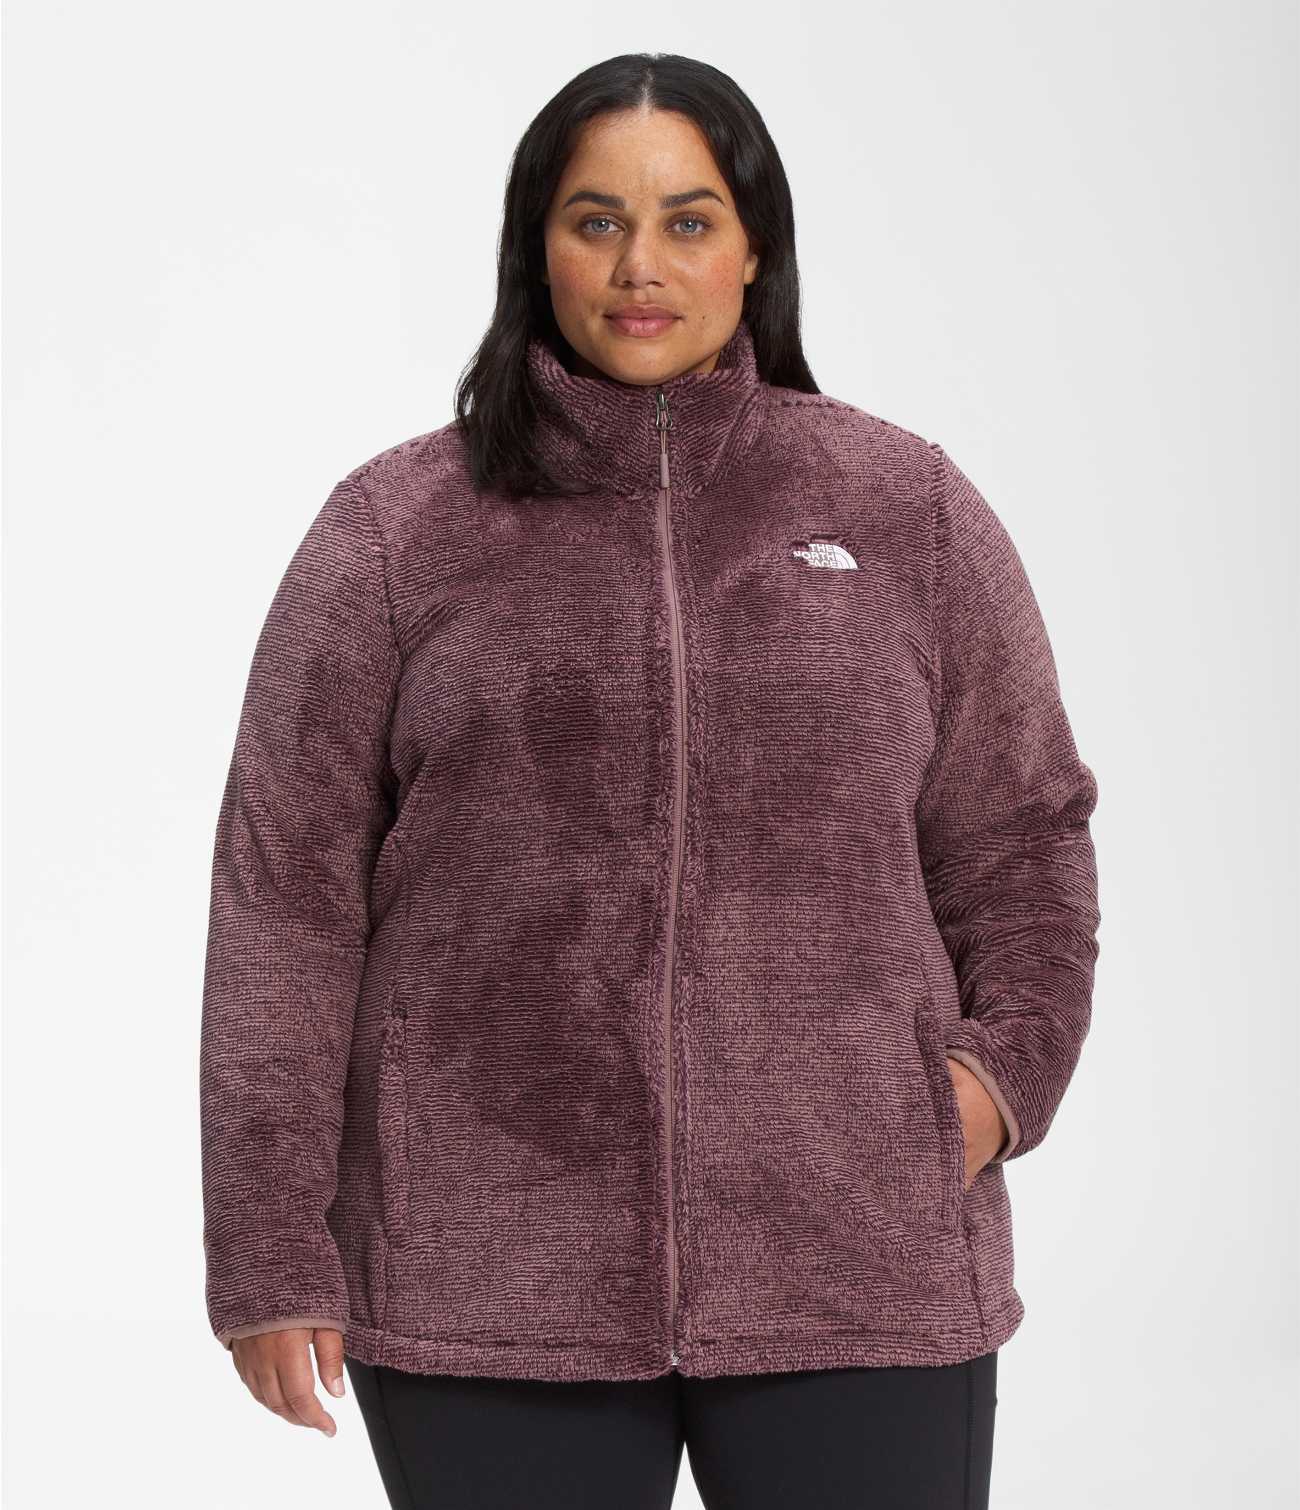 WOMEN'S PRINTED MULTI-COLOR OSITO JACKET, The North Face